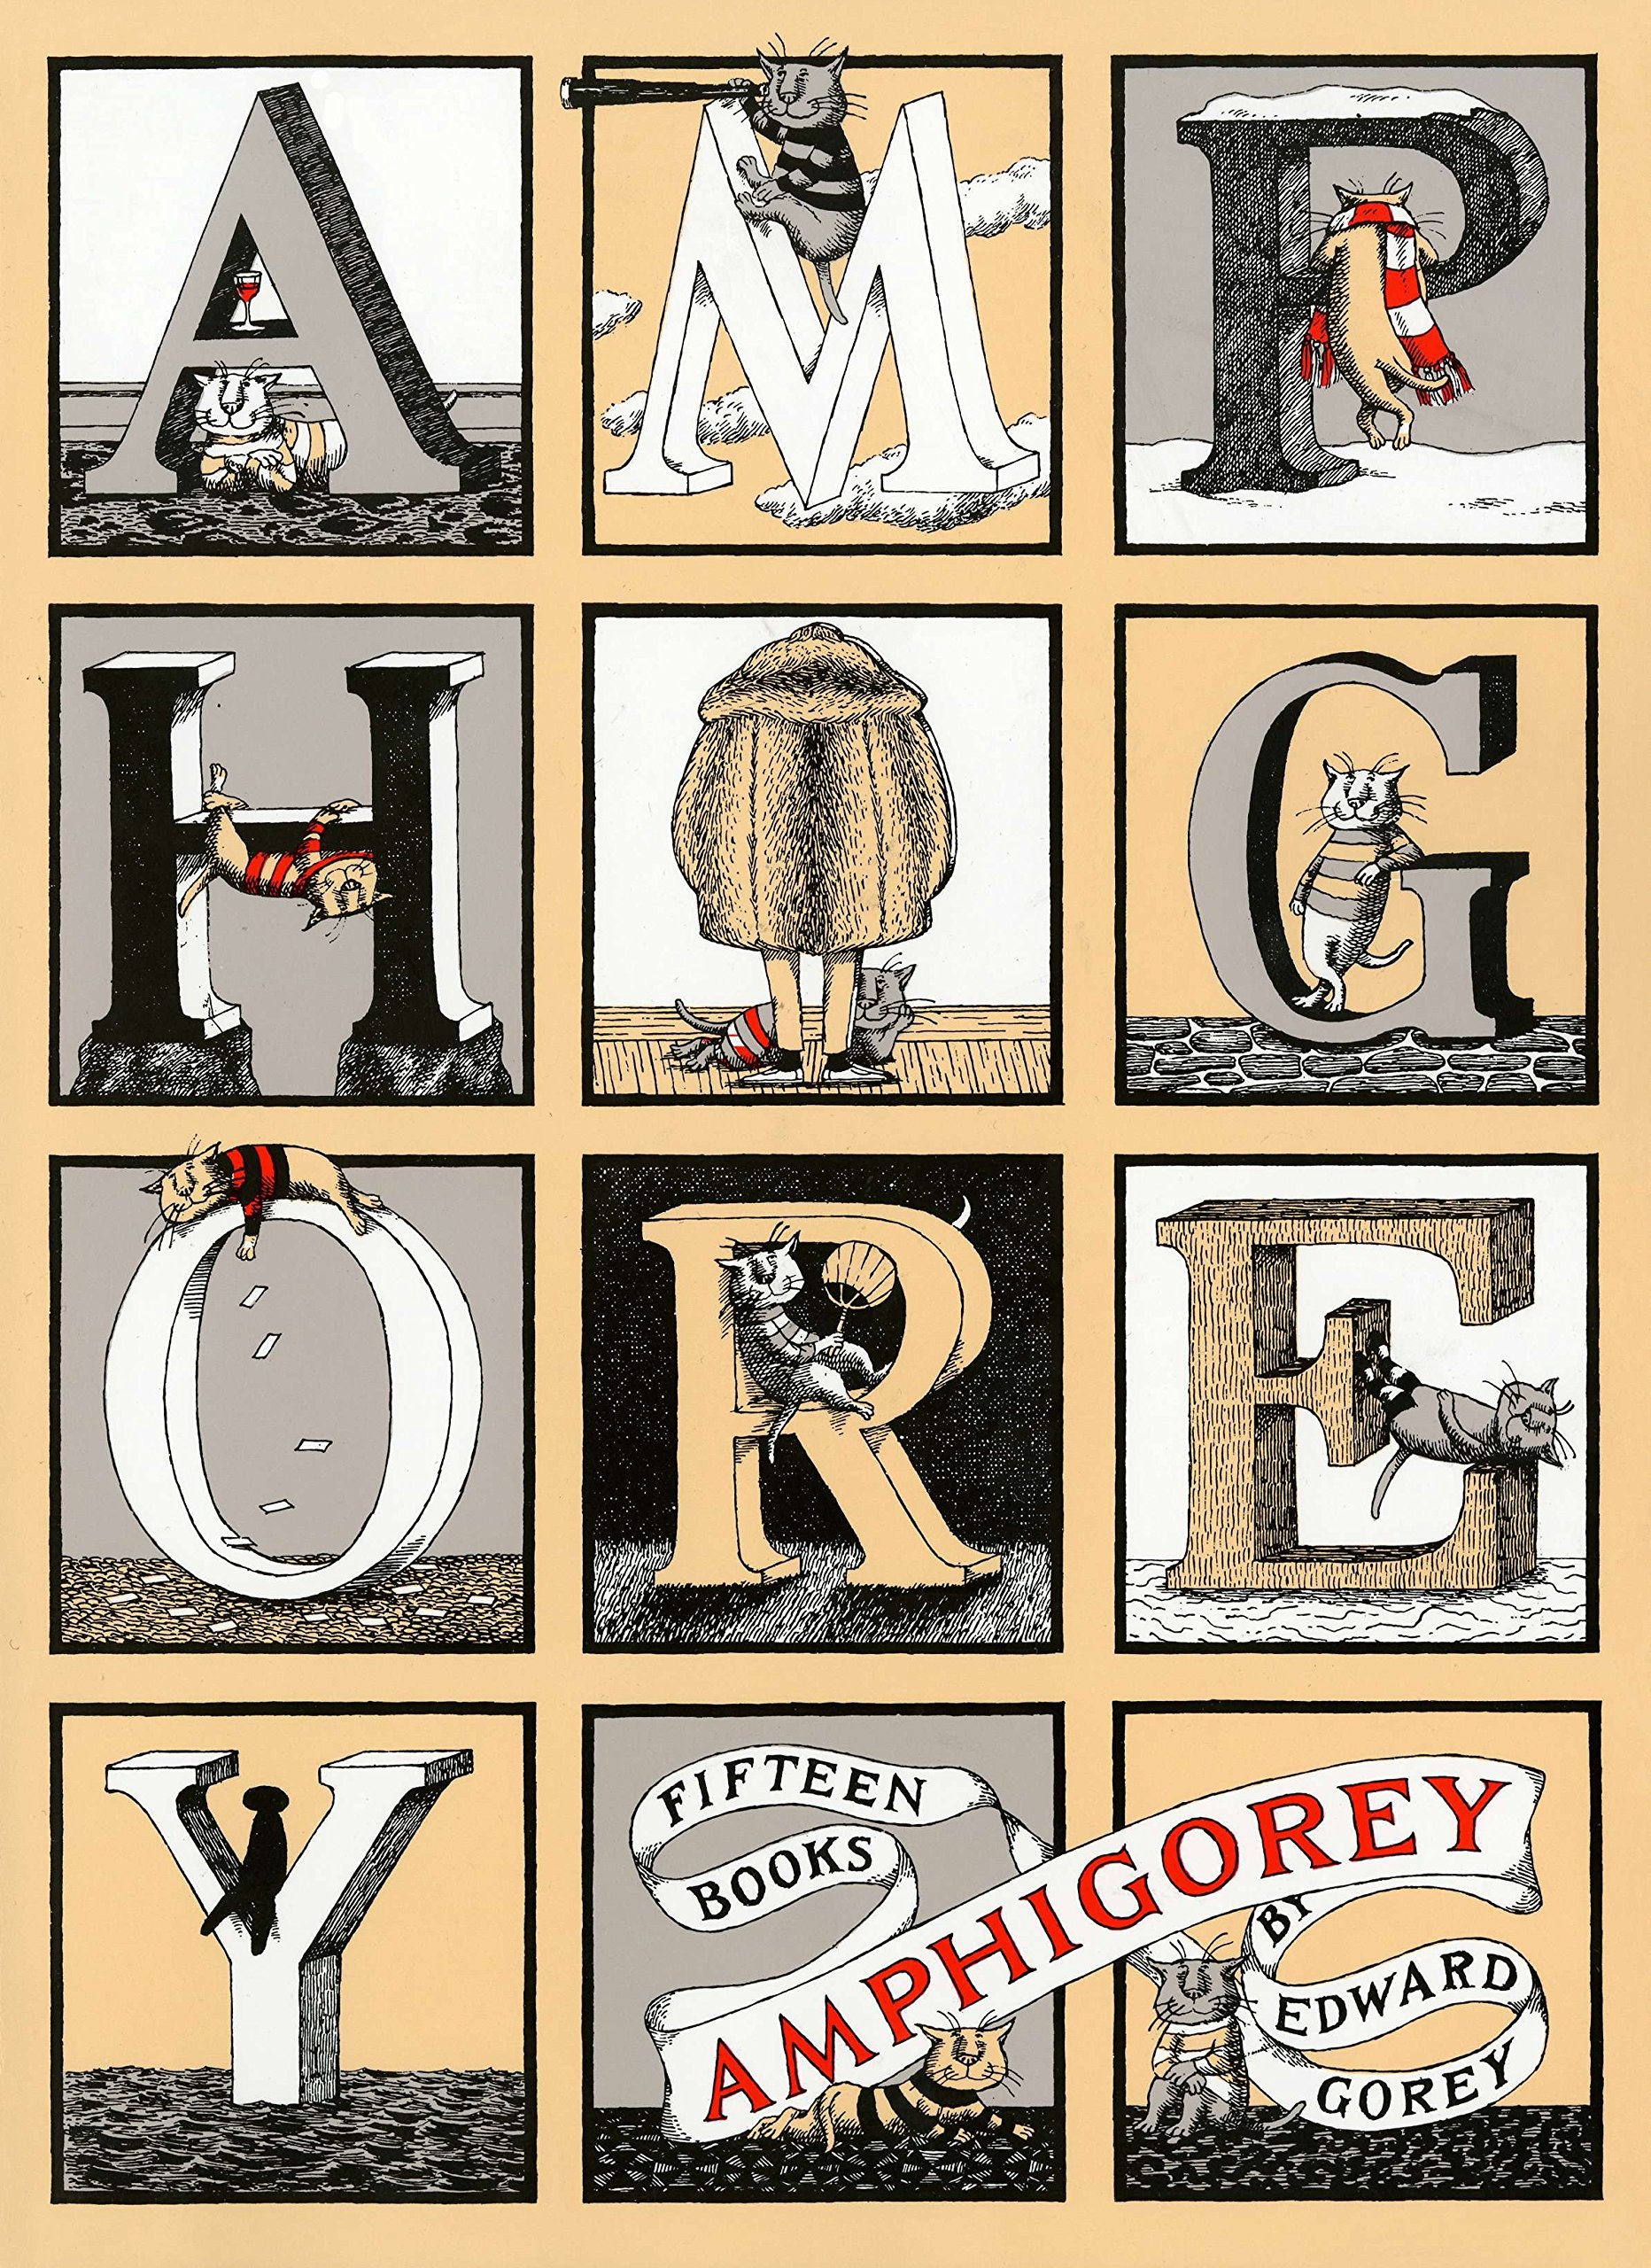 Cover of "Amphigorey: Fifteen Books by Edward Gorey." The cover is illustrated, with each letter of "Amphigorey" pictured to look like a letter block and there are three letters per row.  Illustrated cats are climbing on or sitting around each of the letters of "Amphigorey". 